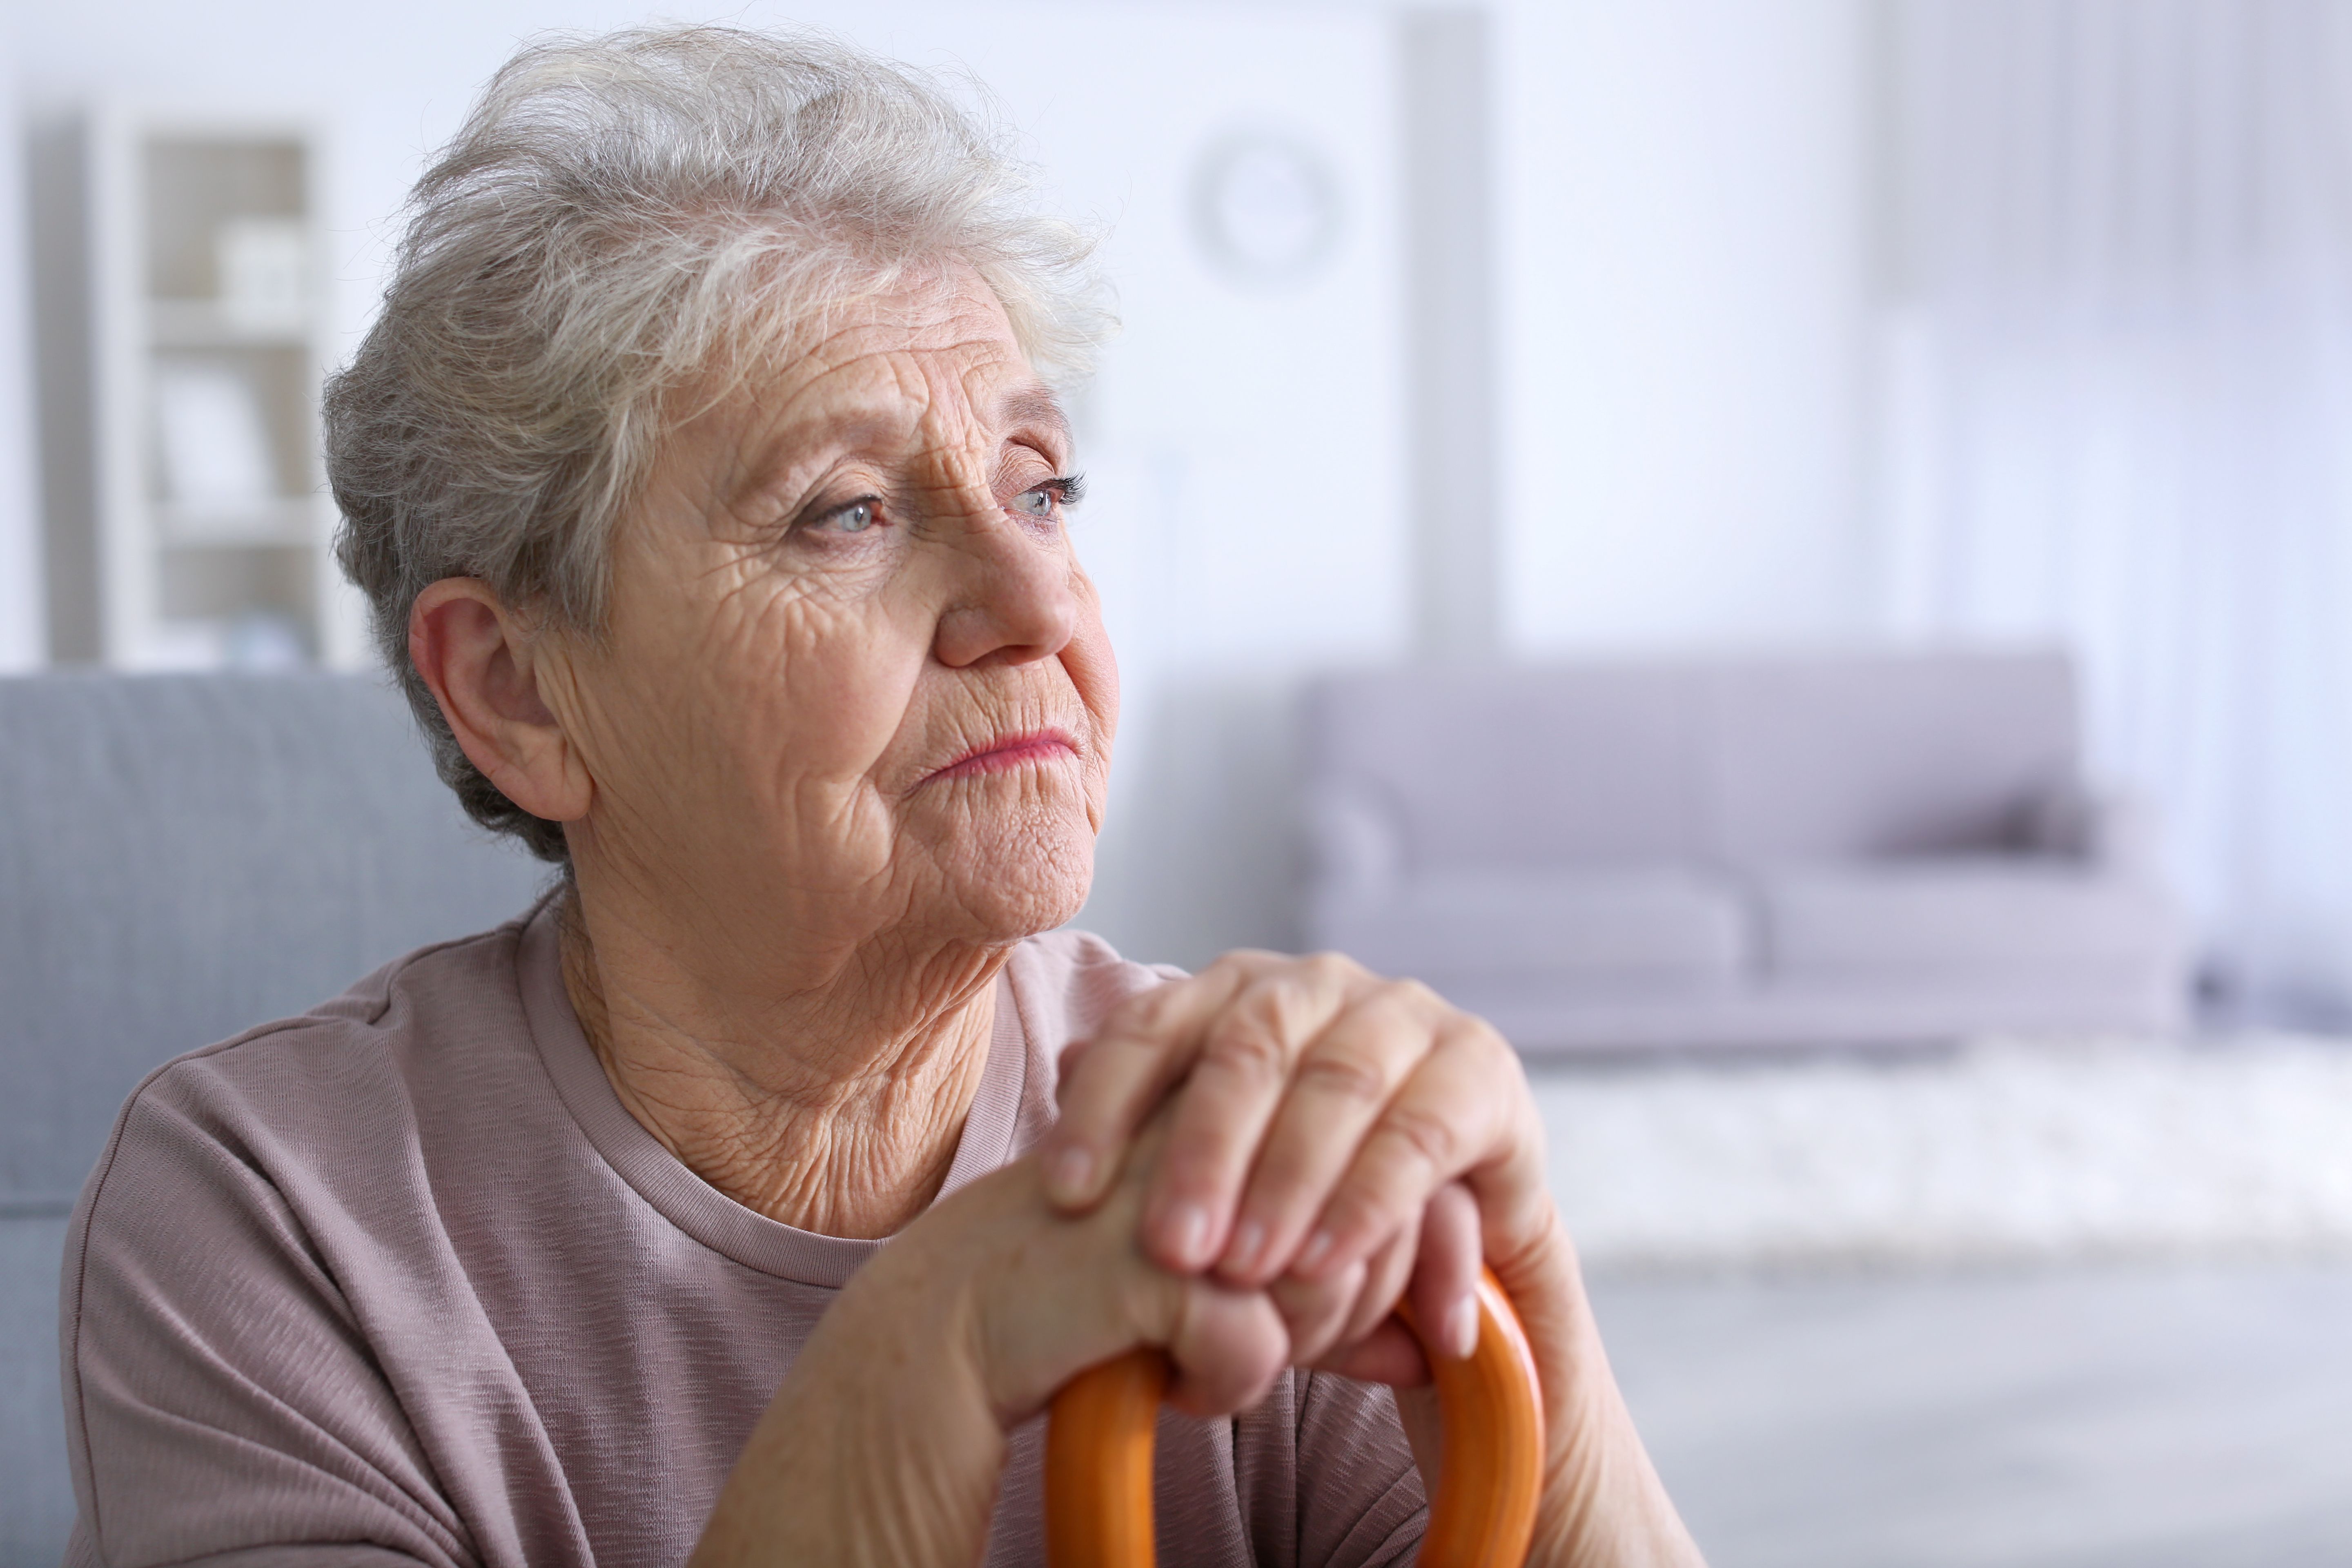 An old woman looking disappointed. | Source: Shutterstock